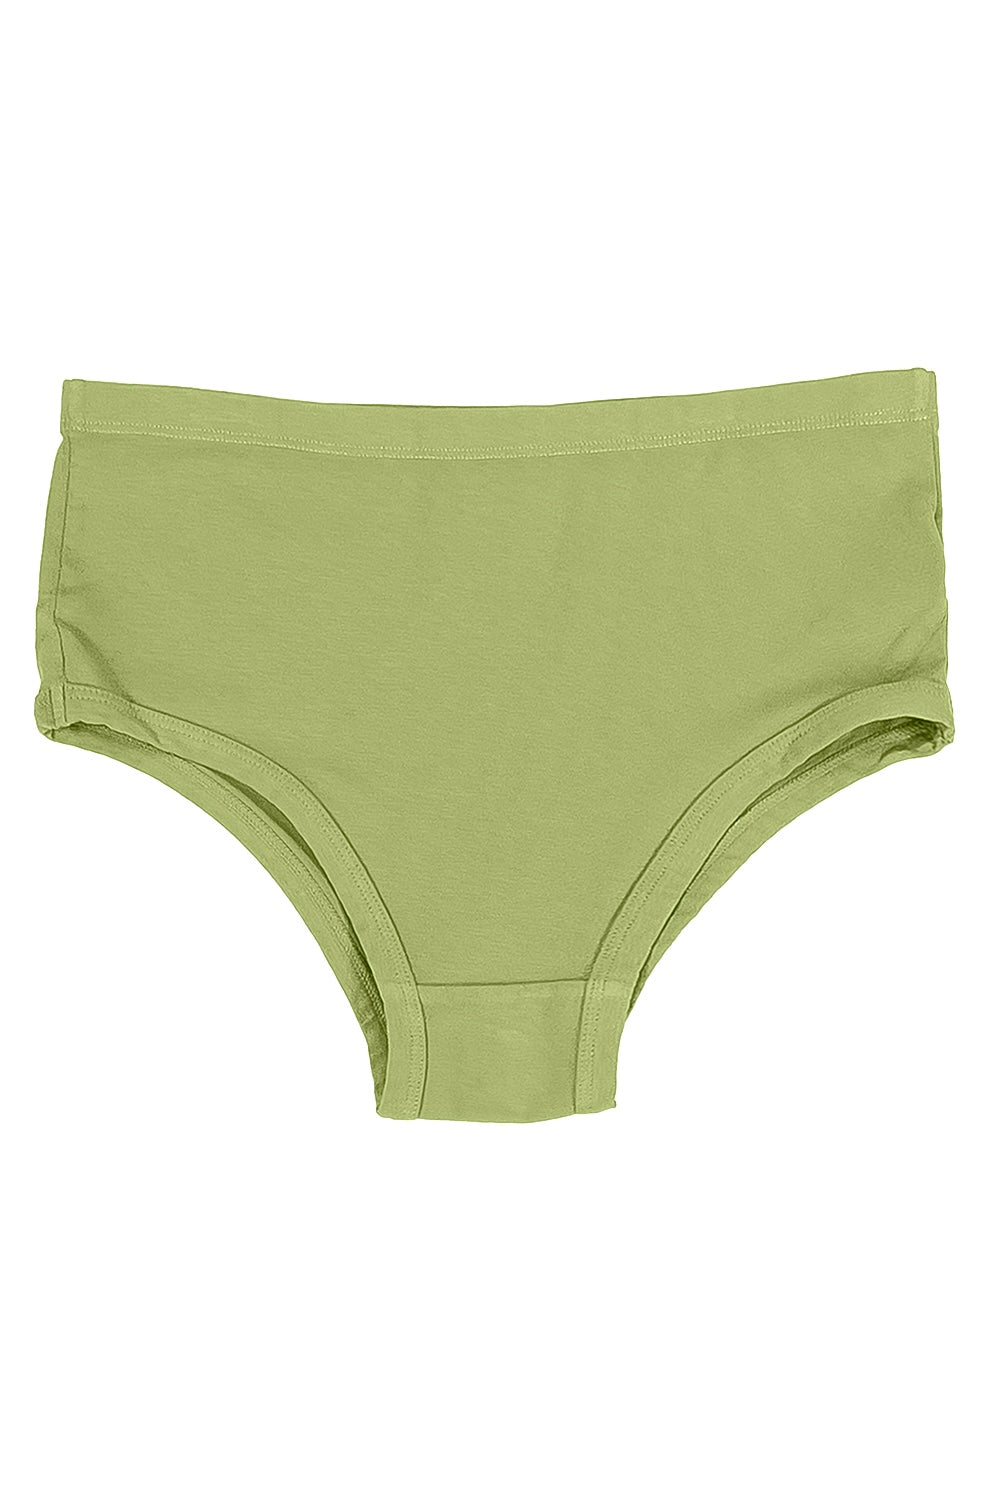 Green Panties With White Dots. High Waist. Underwear for Women. Cotton  Panties. Free Shipping. All Sizes -  Canada